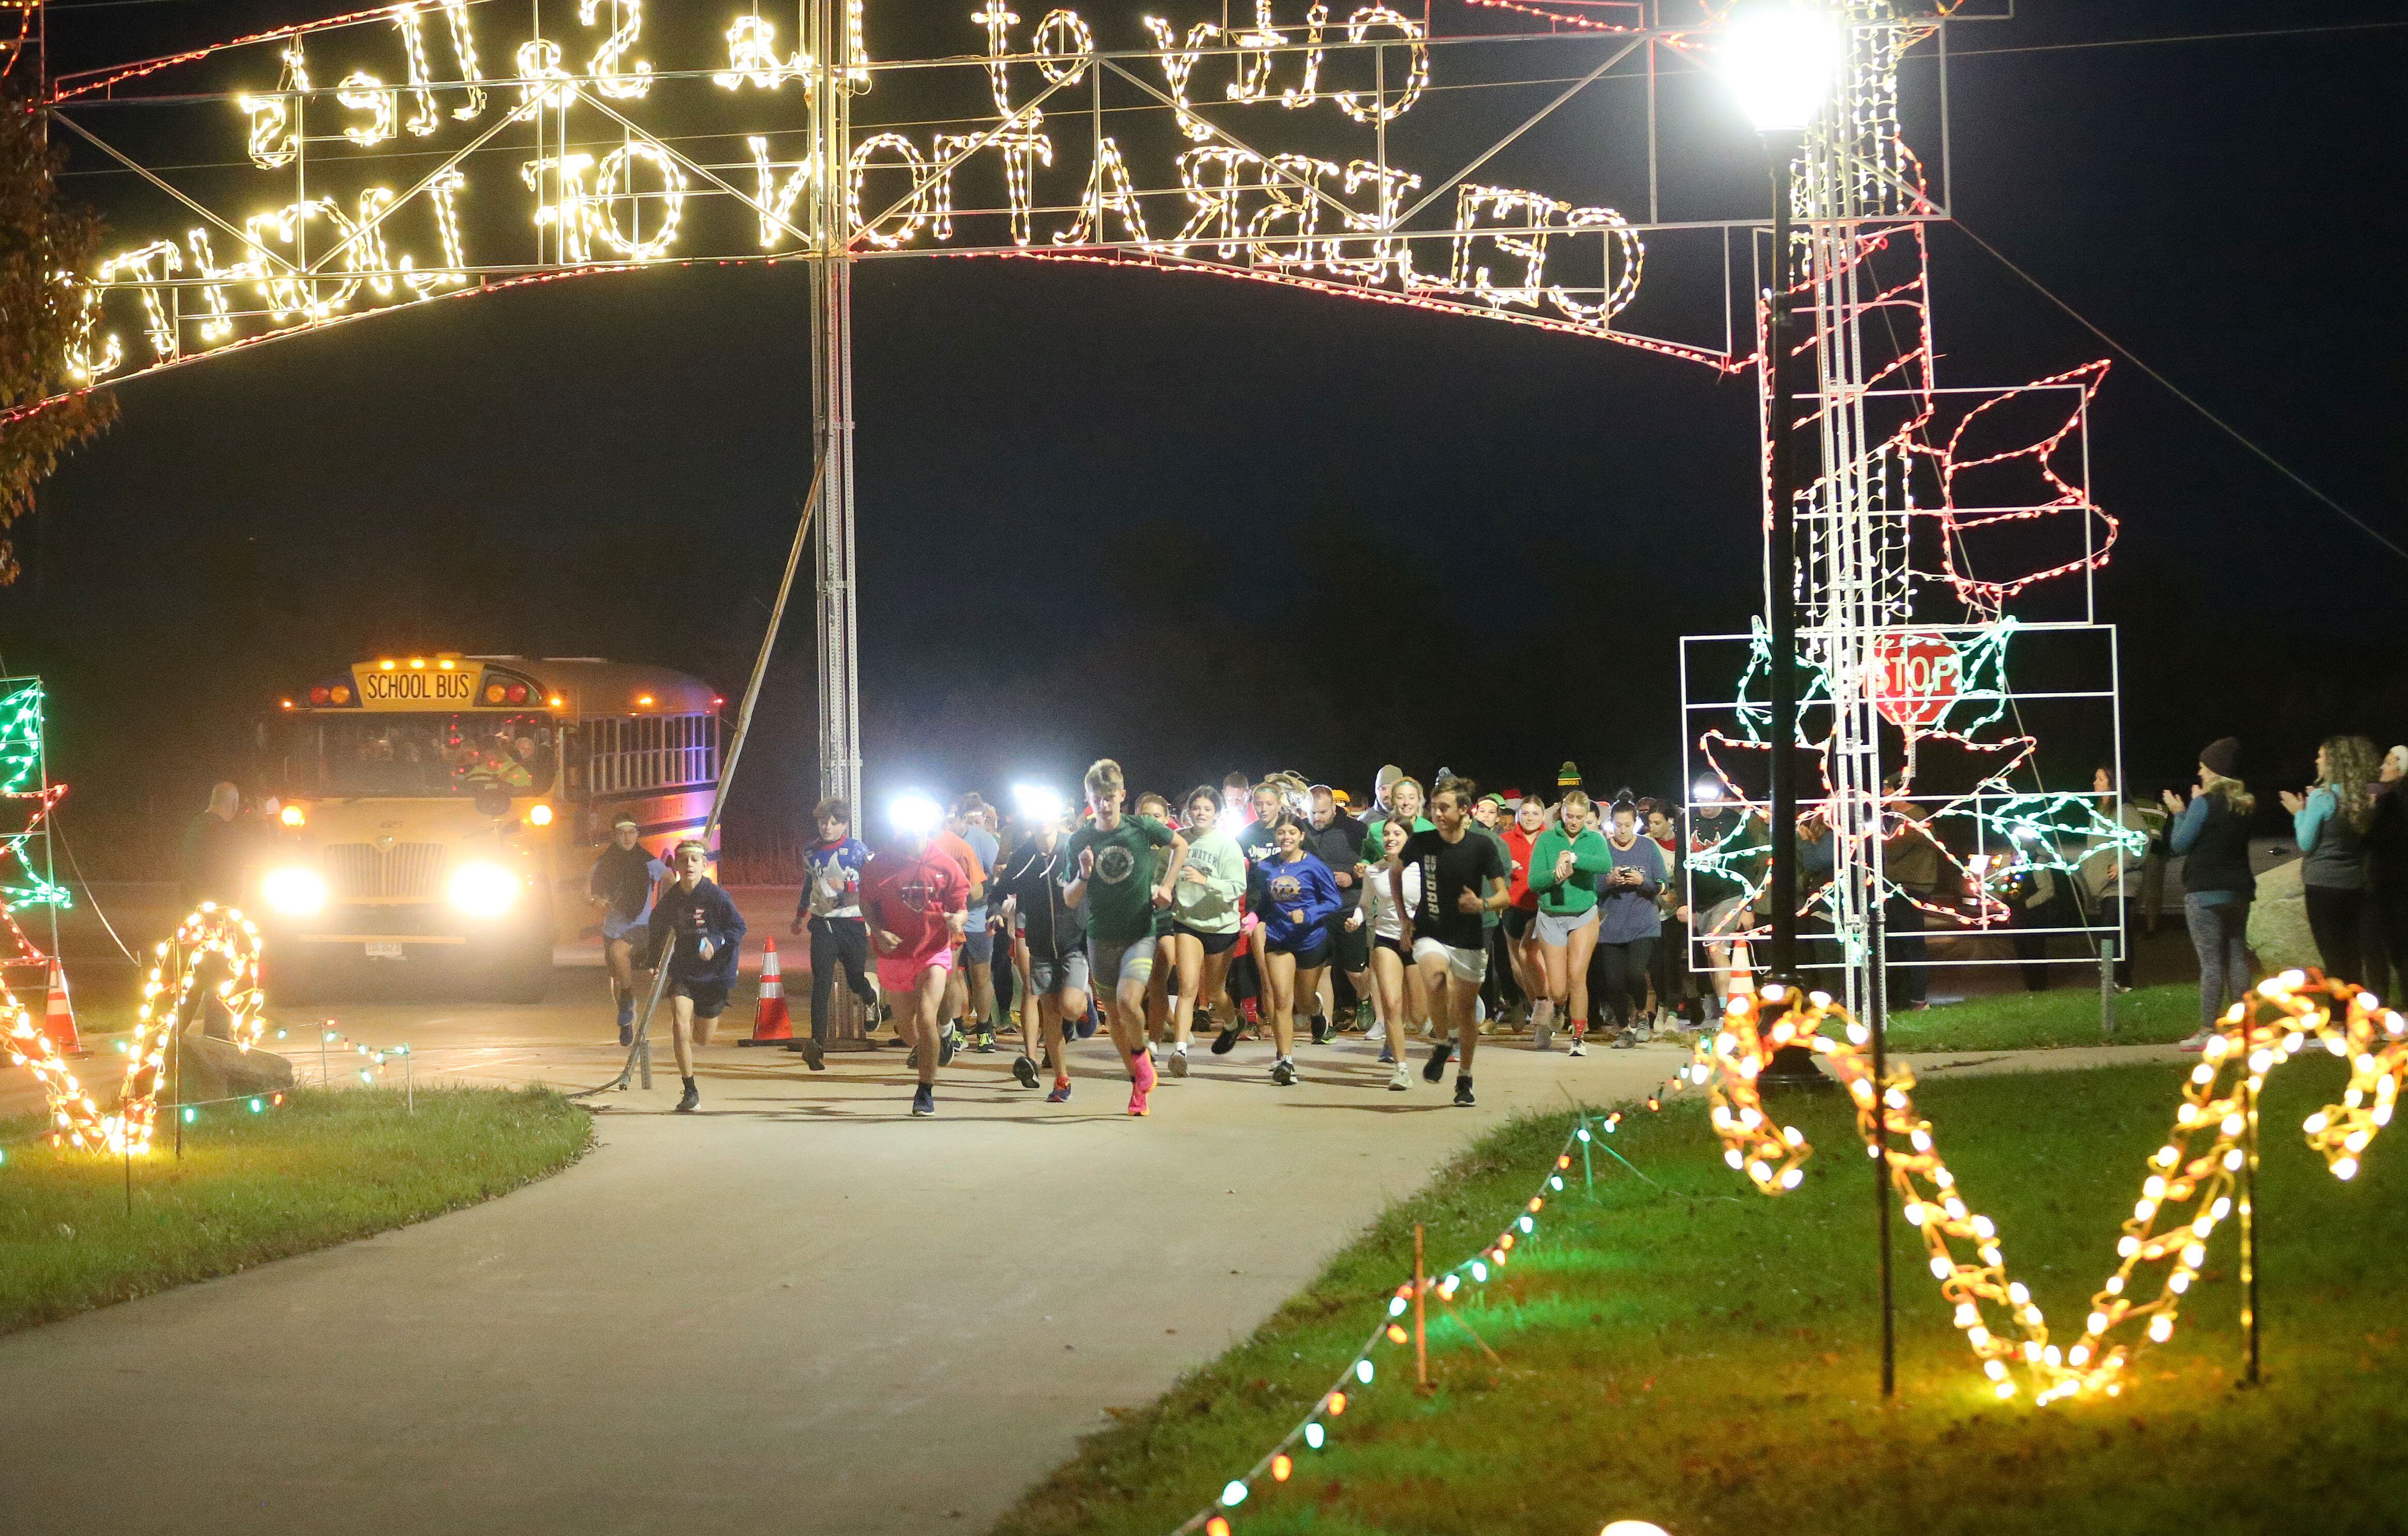 Hundreds of people begin the Run Run Rudolph 5K Fun Run on Sunday, Nov. 5, 2023 at Rotary Park in La Salle. The Celebration Of Lights is the area’s largest drive-thru Christmas light display, stretching throughout Rotary Park on the east side of La Salle.